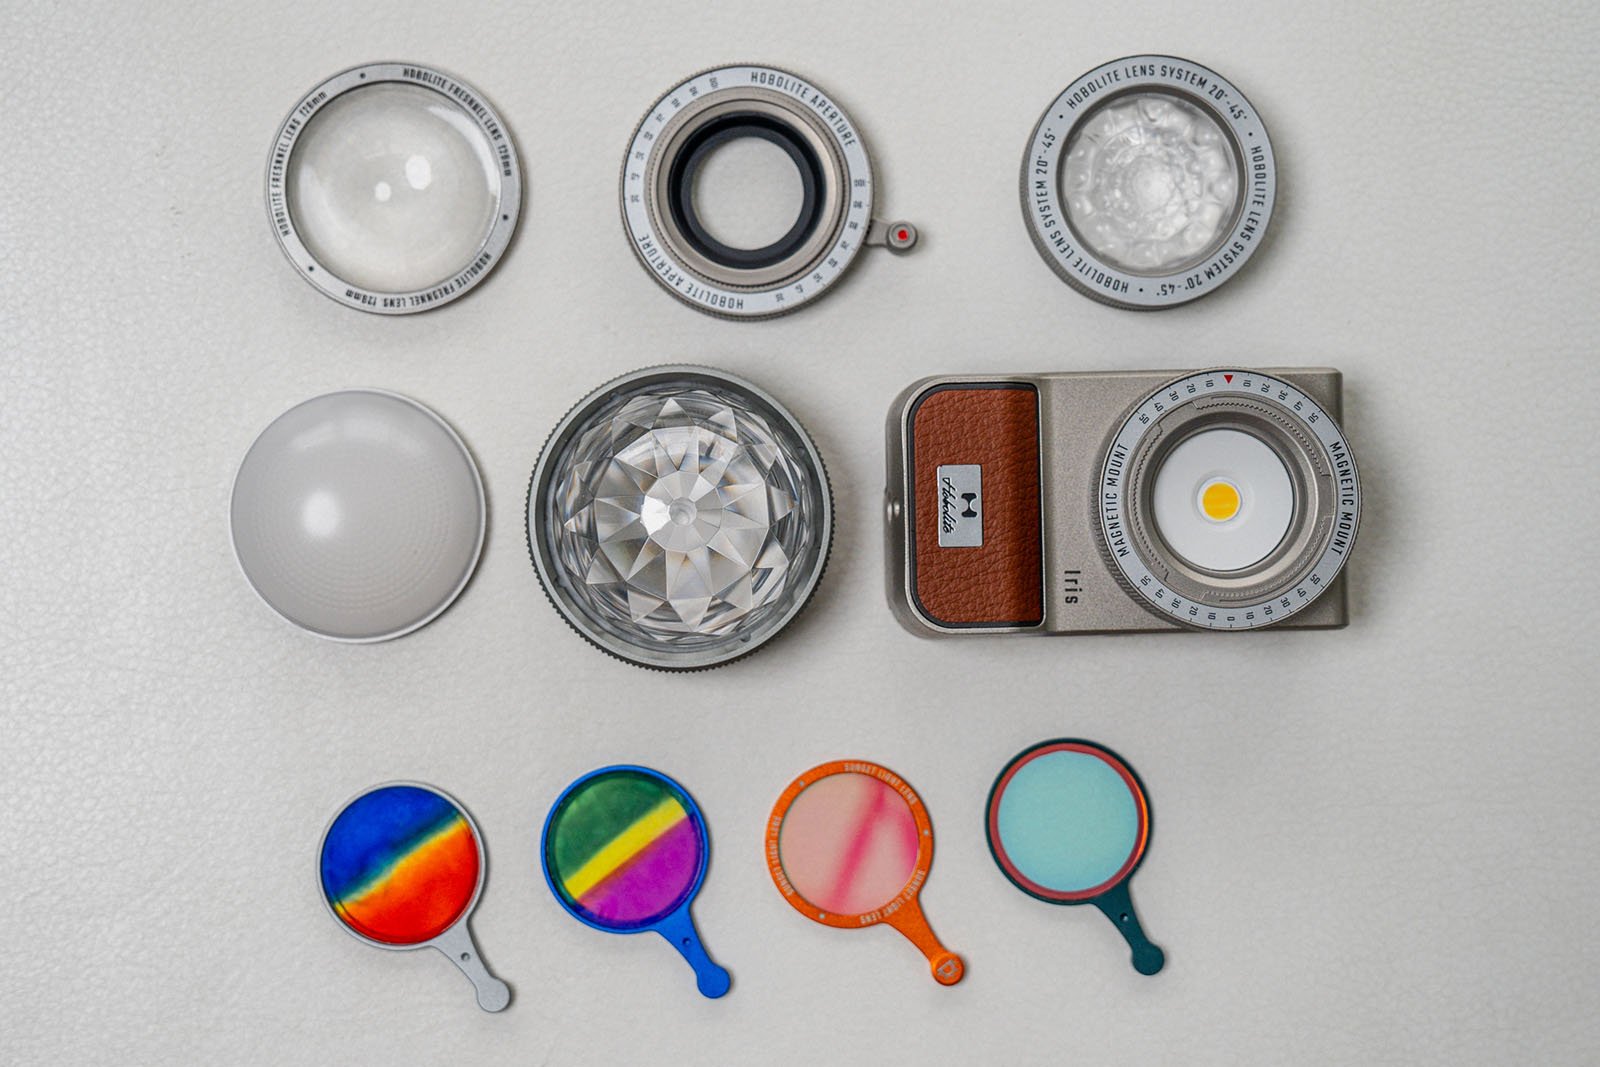 A collection of photography accessories arranged on a white surface, including camera filters, a lens, a camera body, and various colored lens covers. The colored covers include a blue, red, orange, and rainbow filter.